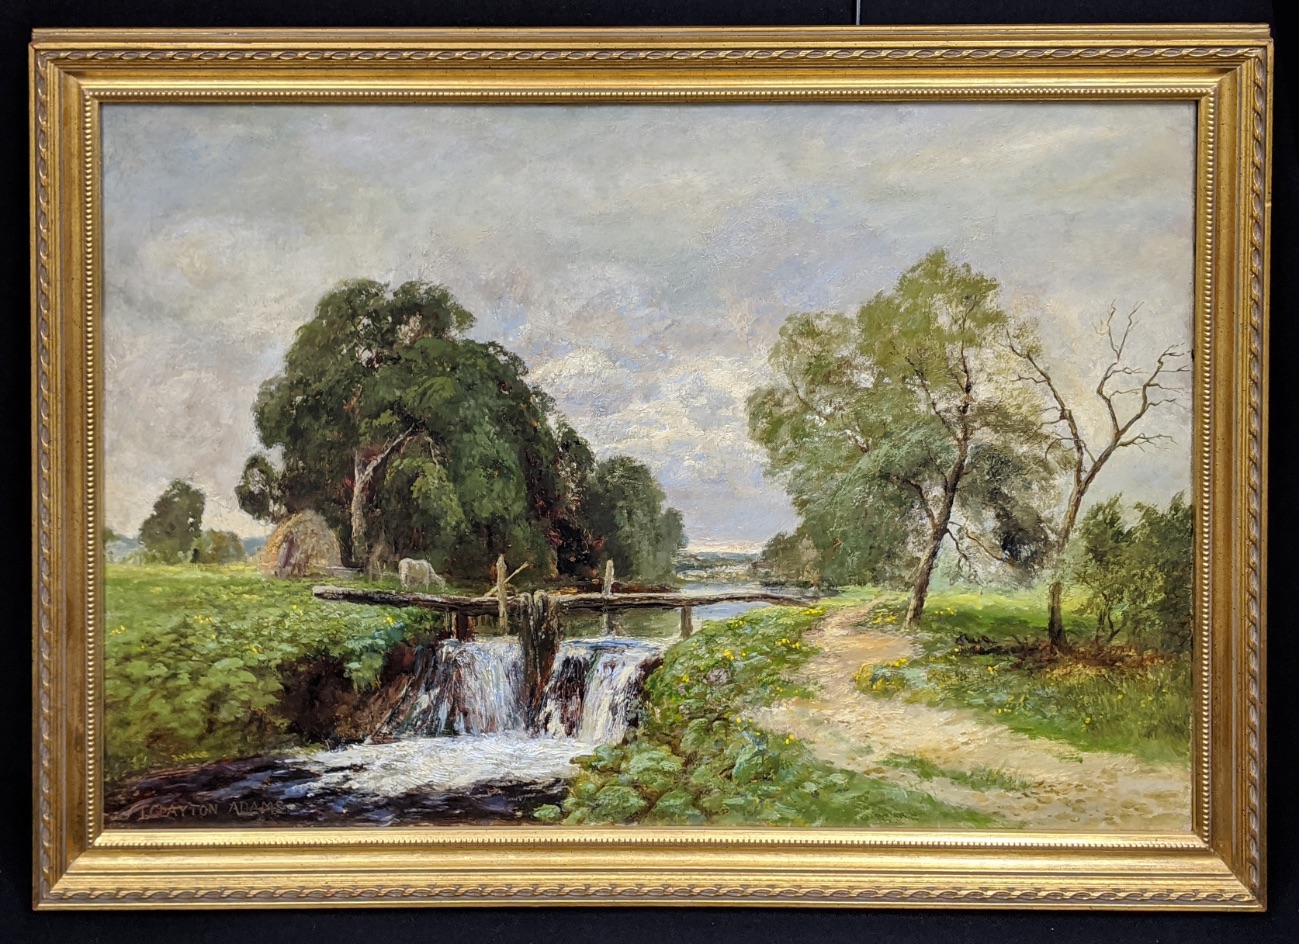 John Clayton Adams (British, 1840-1906), a country landscape scene, oil on canvas, signed lower - Image 2 of 3